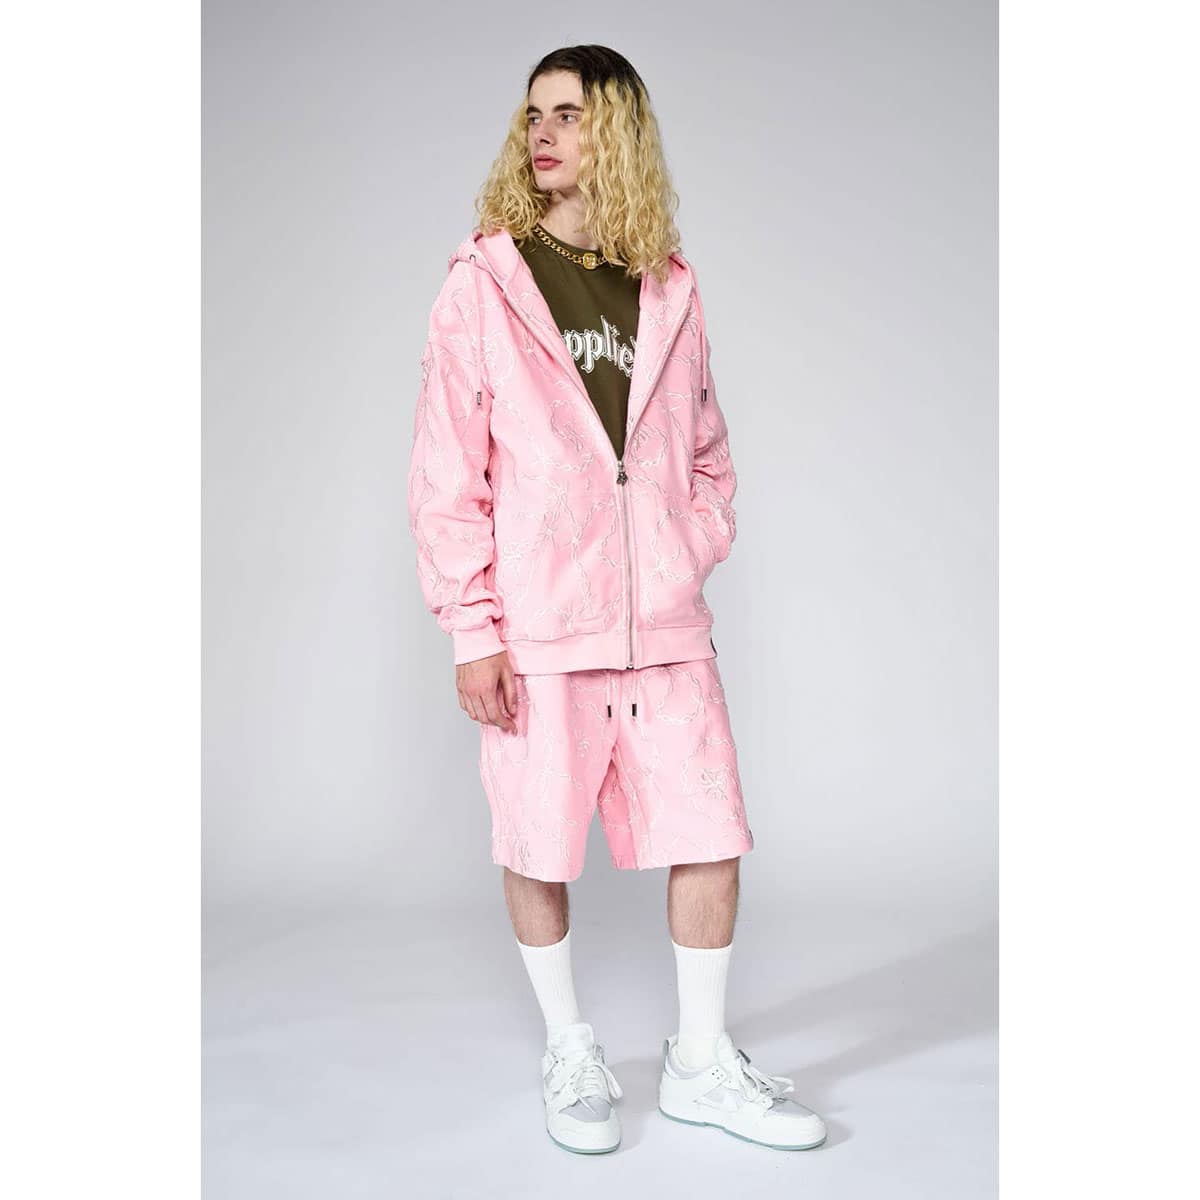 SUPPLIER CROSS CHAIN EMBROIDERY ZIP HOODIE PINK 22SU-I